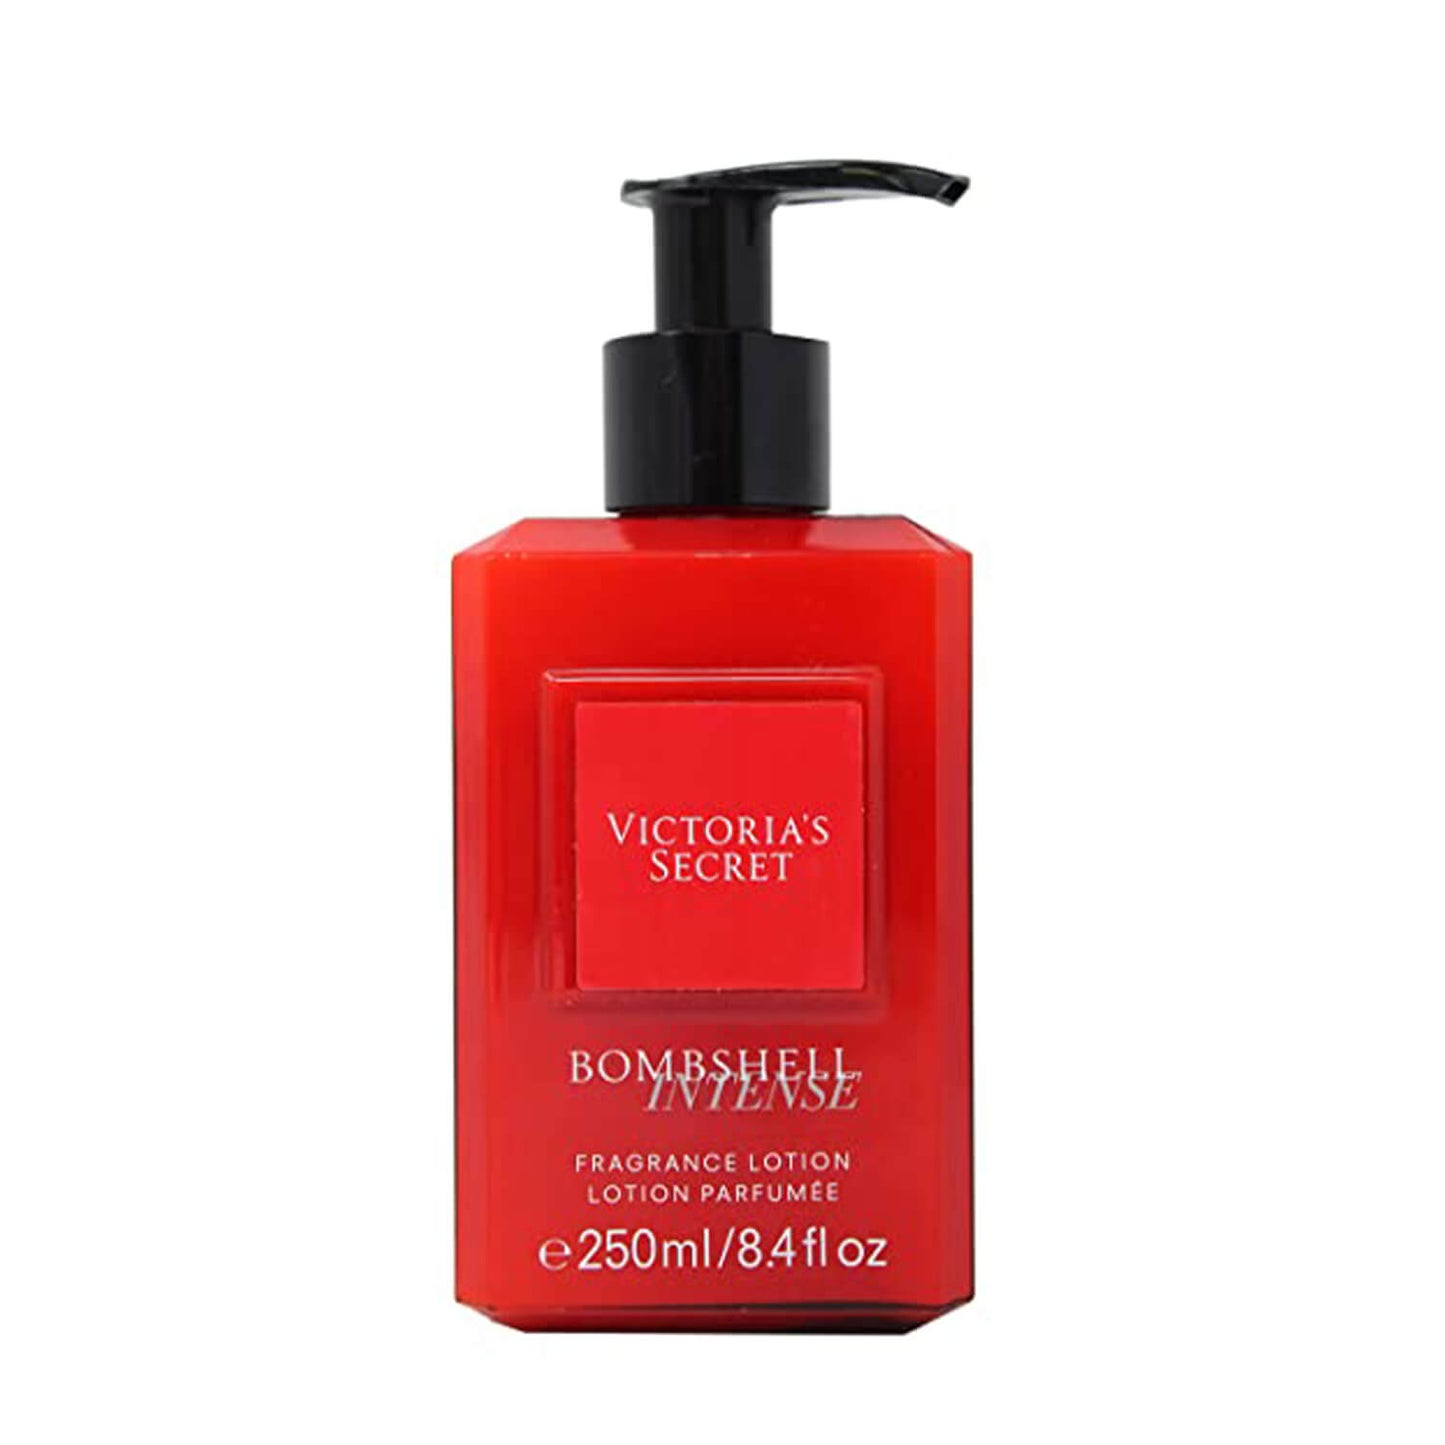 Shop 100% original Victoria's Secret Fragrance Lotion Bombshell Intense available at Heygirl.pk for delivery in Pakistan